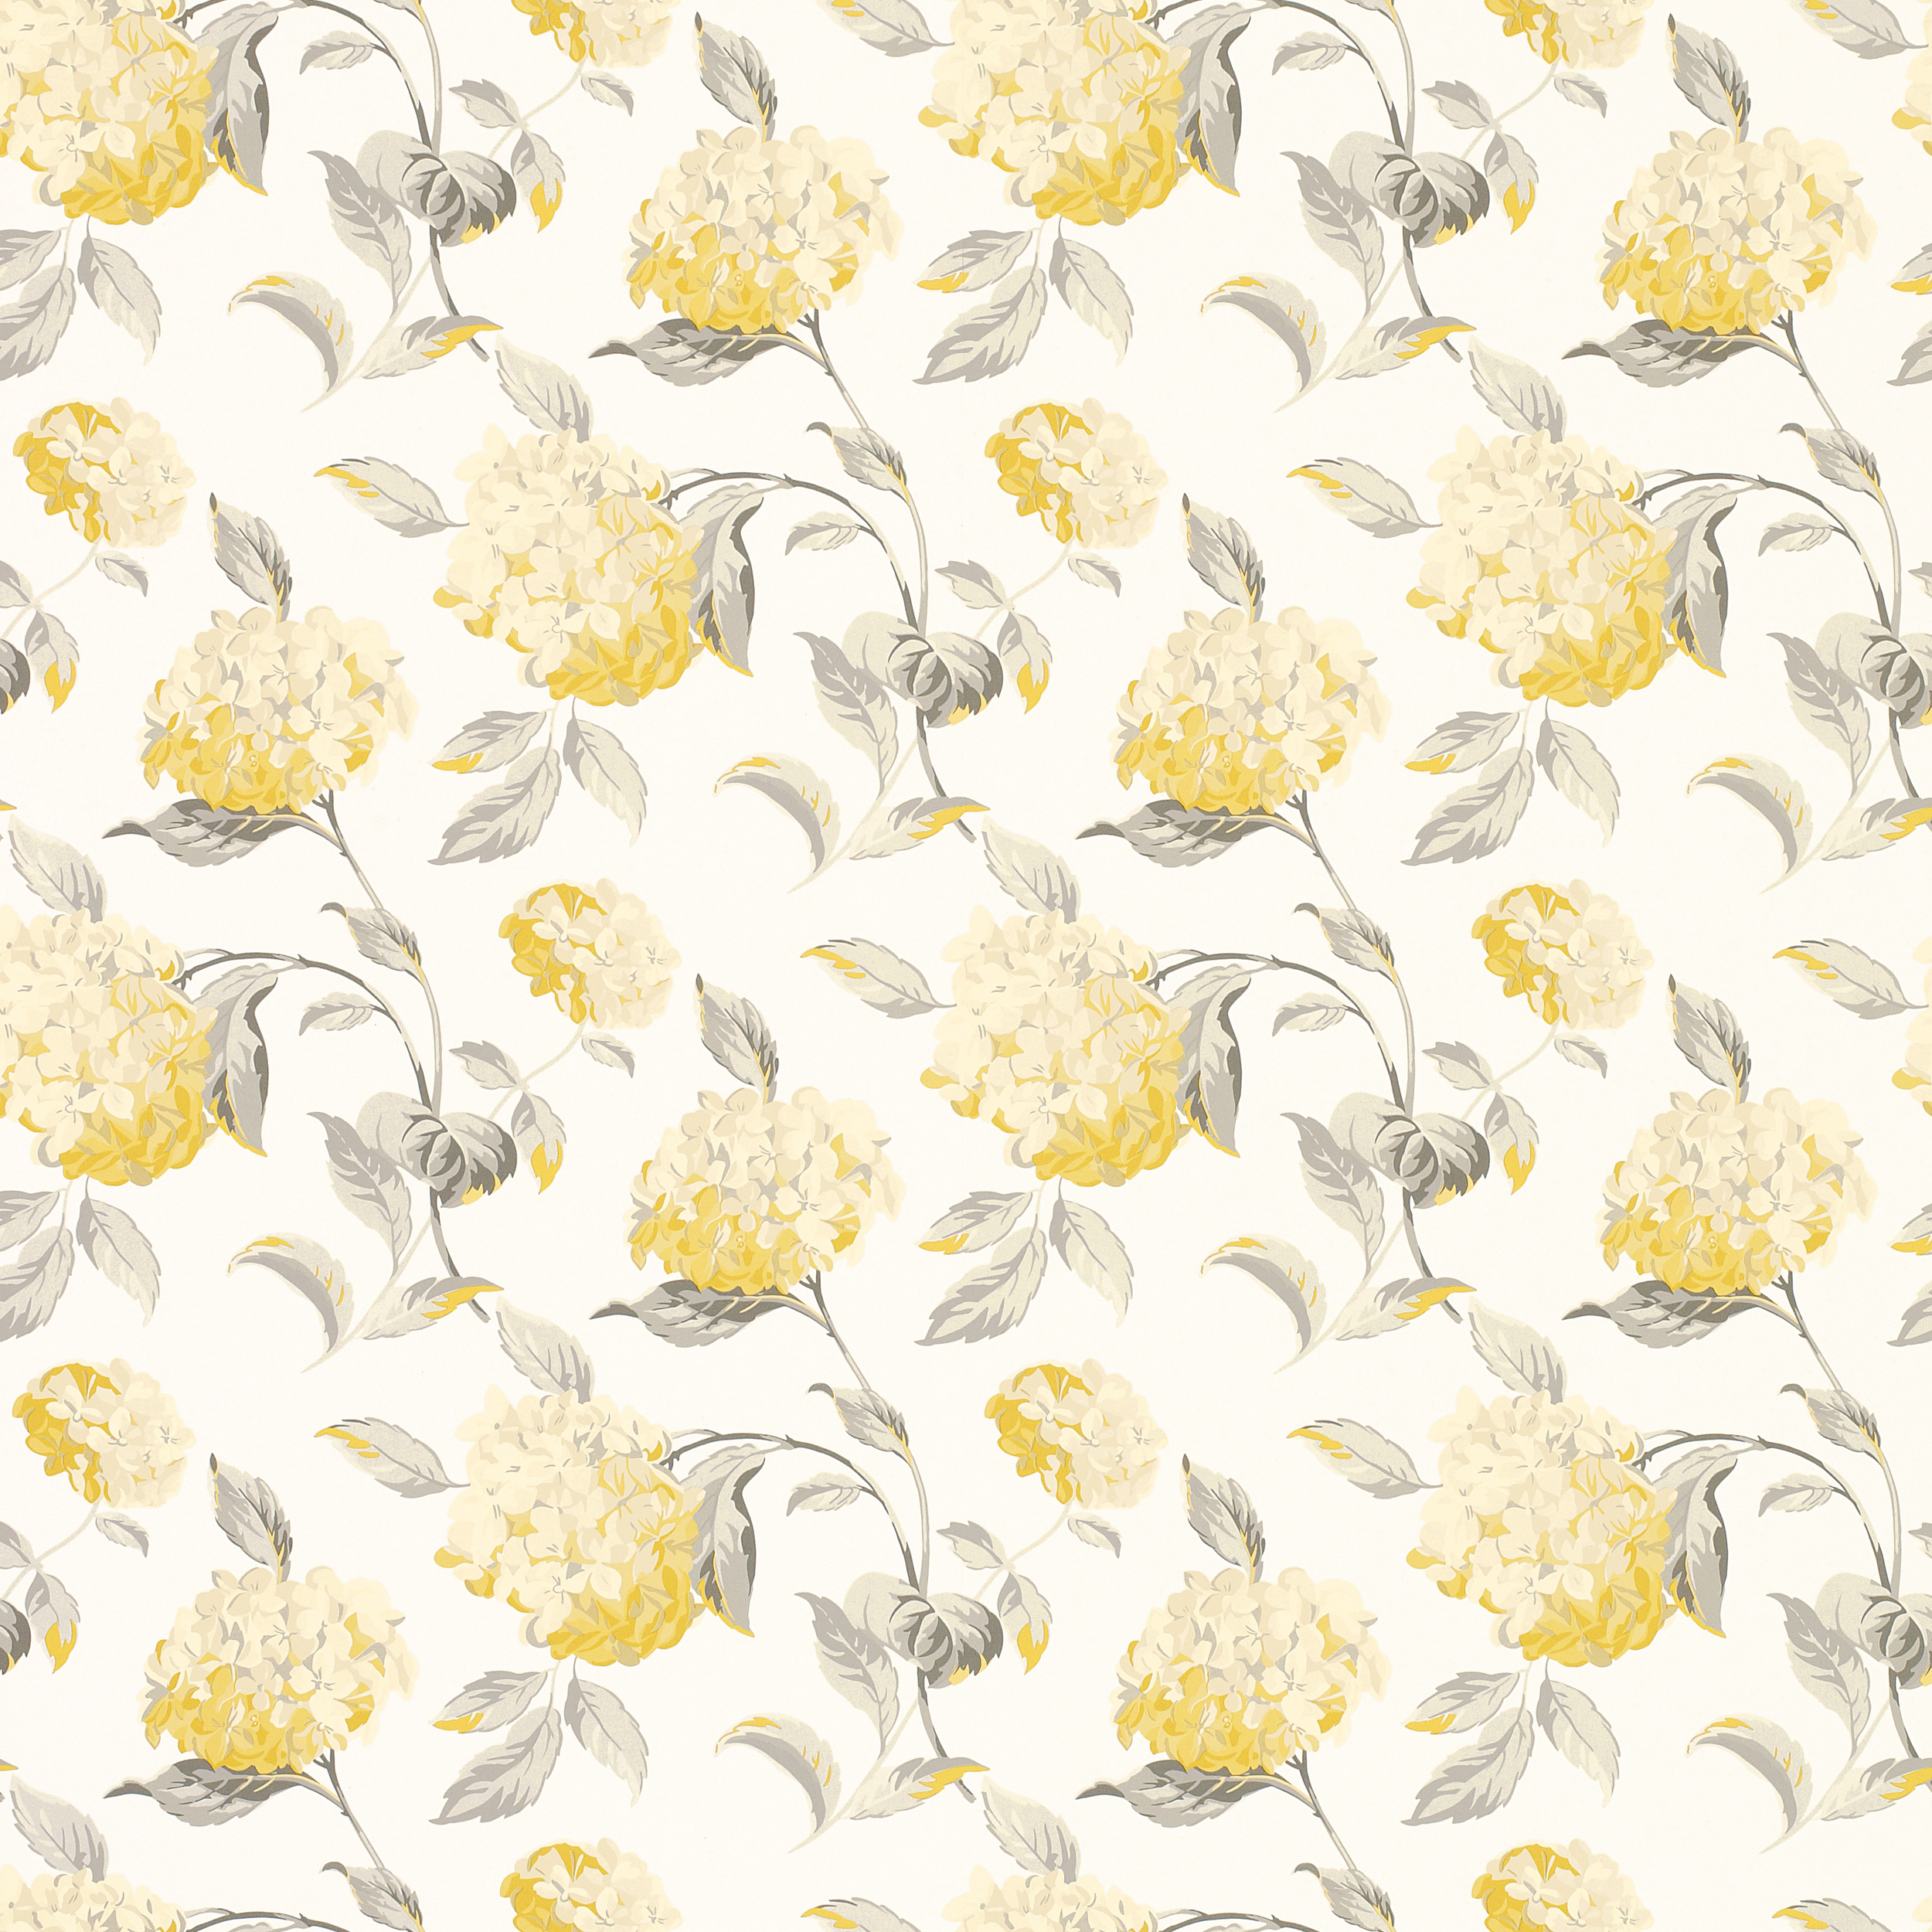 Hydrangea Camomile Floral Wallpaper at Laura Ashley